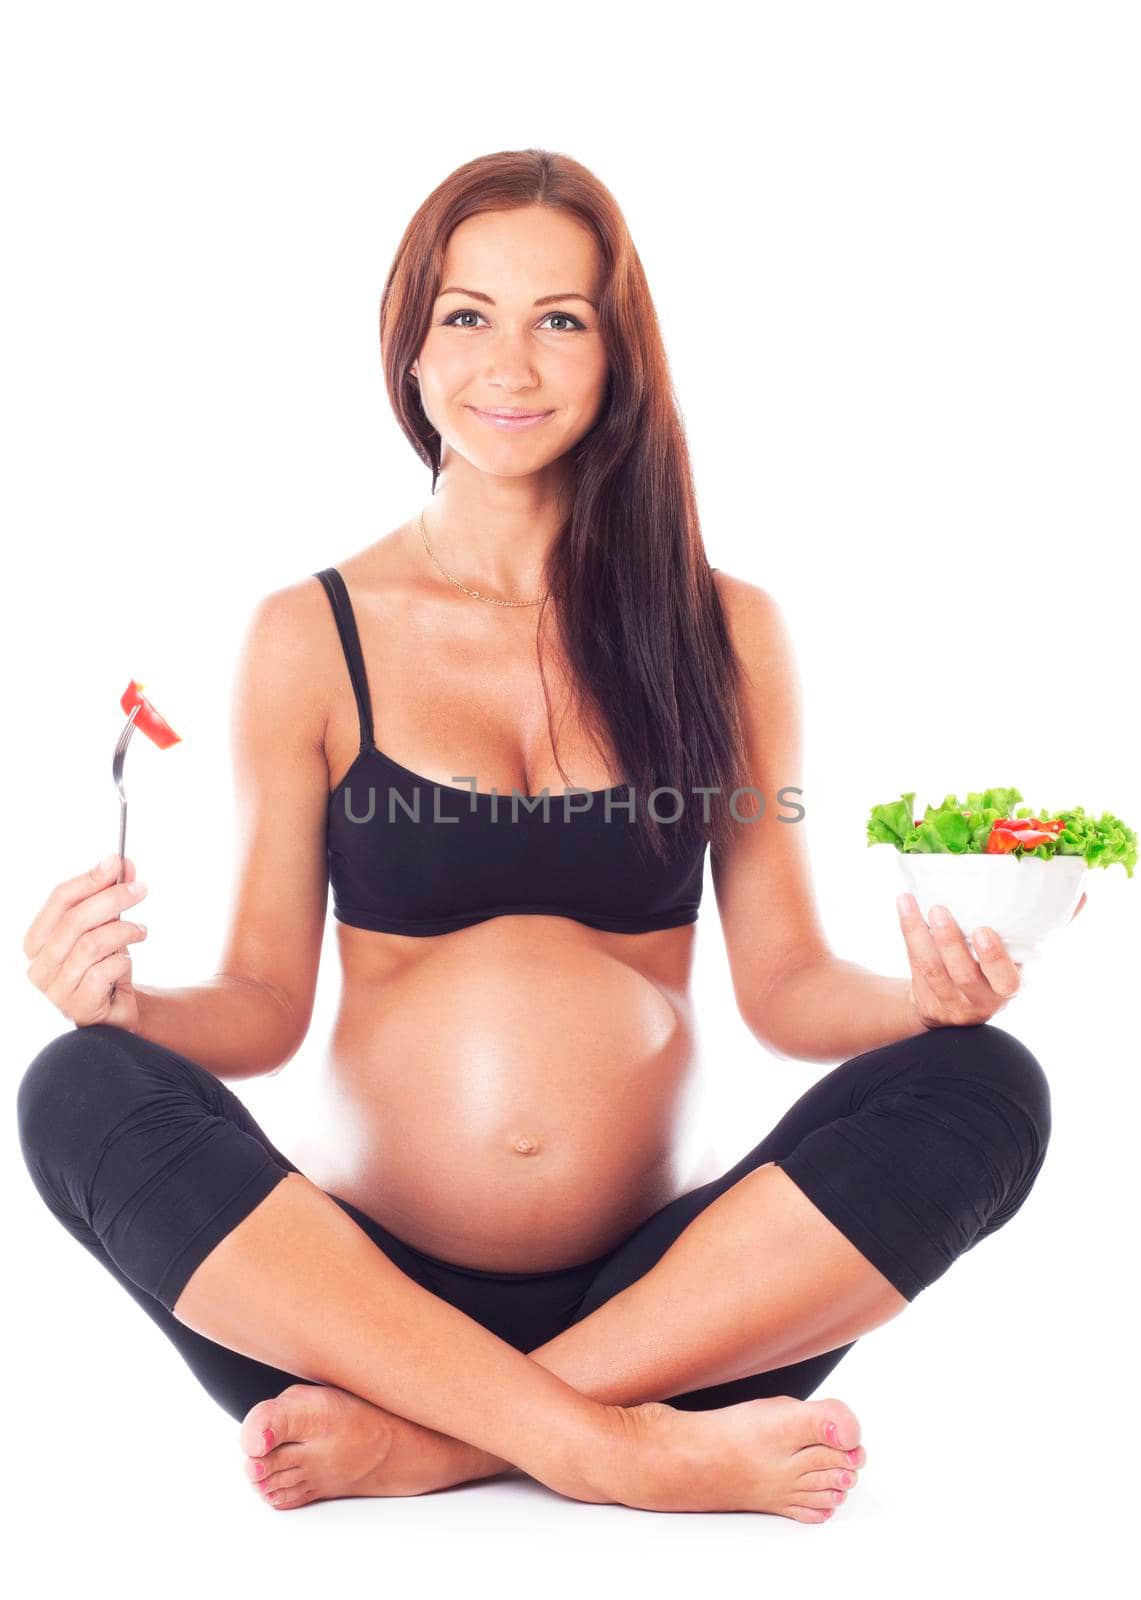 Pregnant woman eating salad. by Jyliana